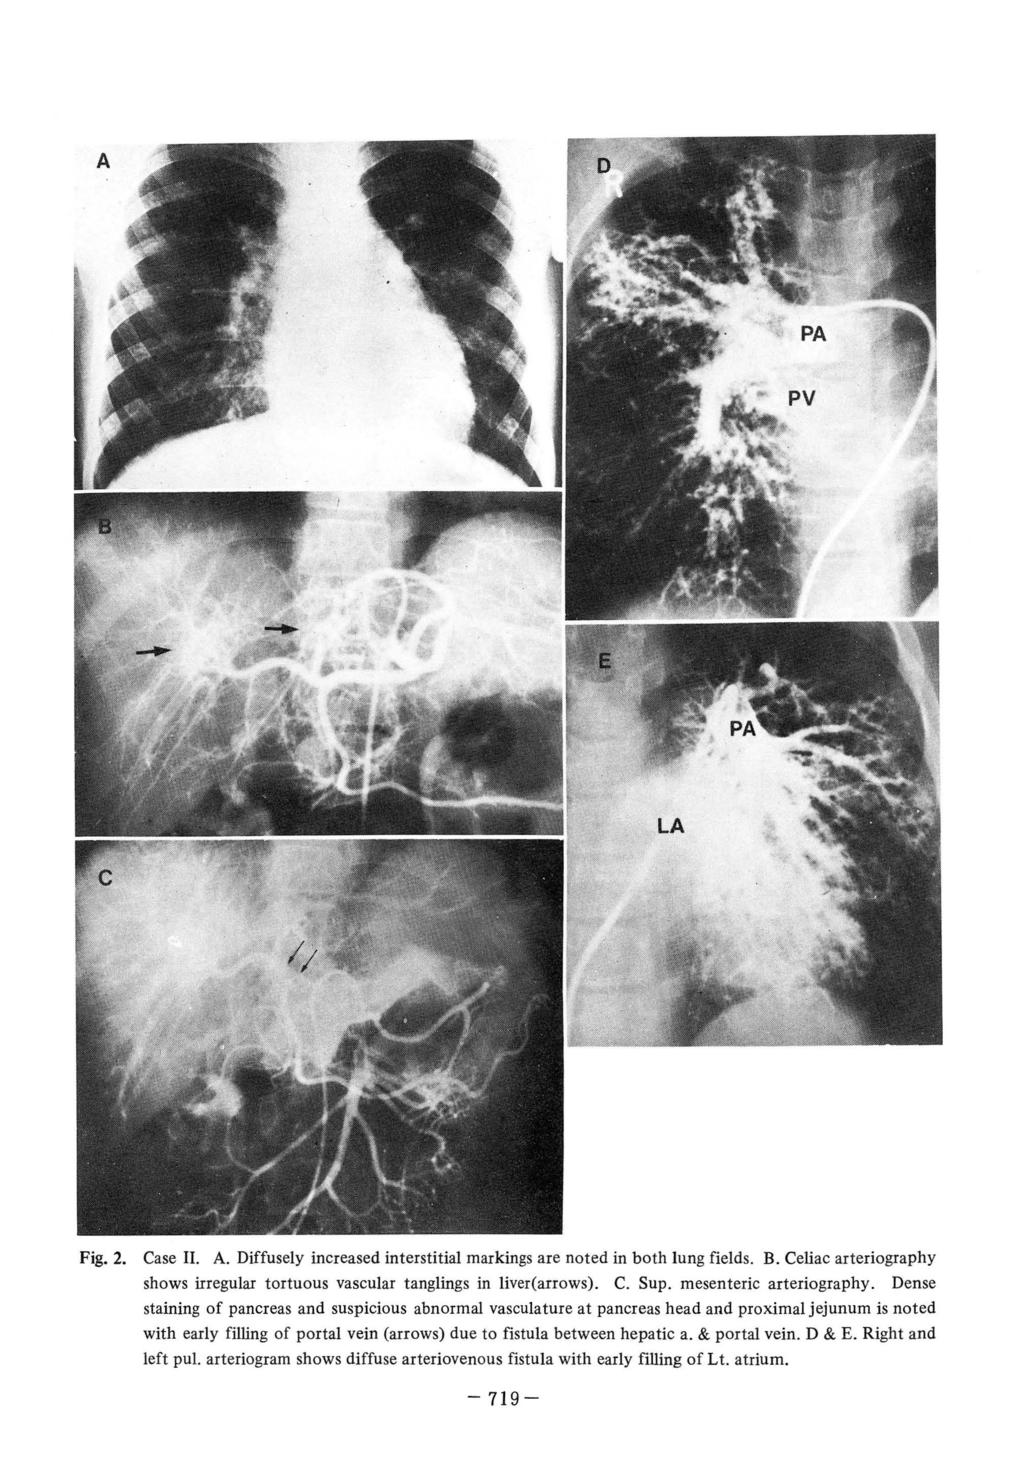 Fig. 2. Case II. A. Diffusely increased interstitial markings are noted in both lung fields. B. Celiac arteriography shows irregular tortuous vascular tanglings in liver(arrows). C. Sup.